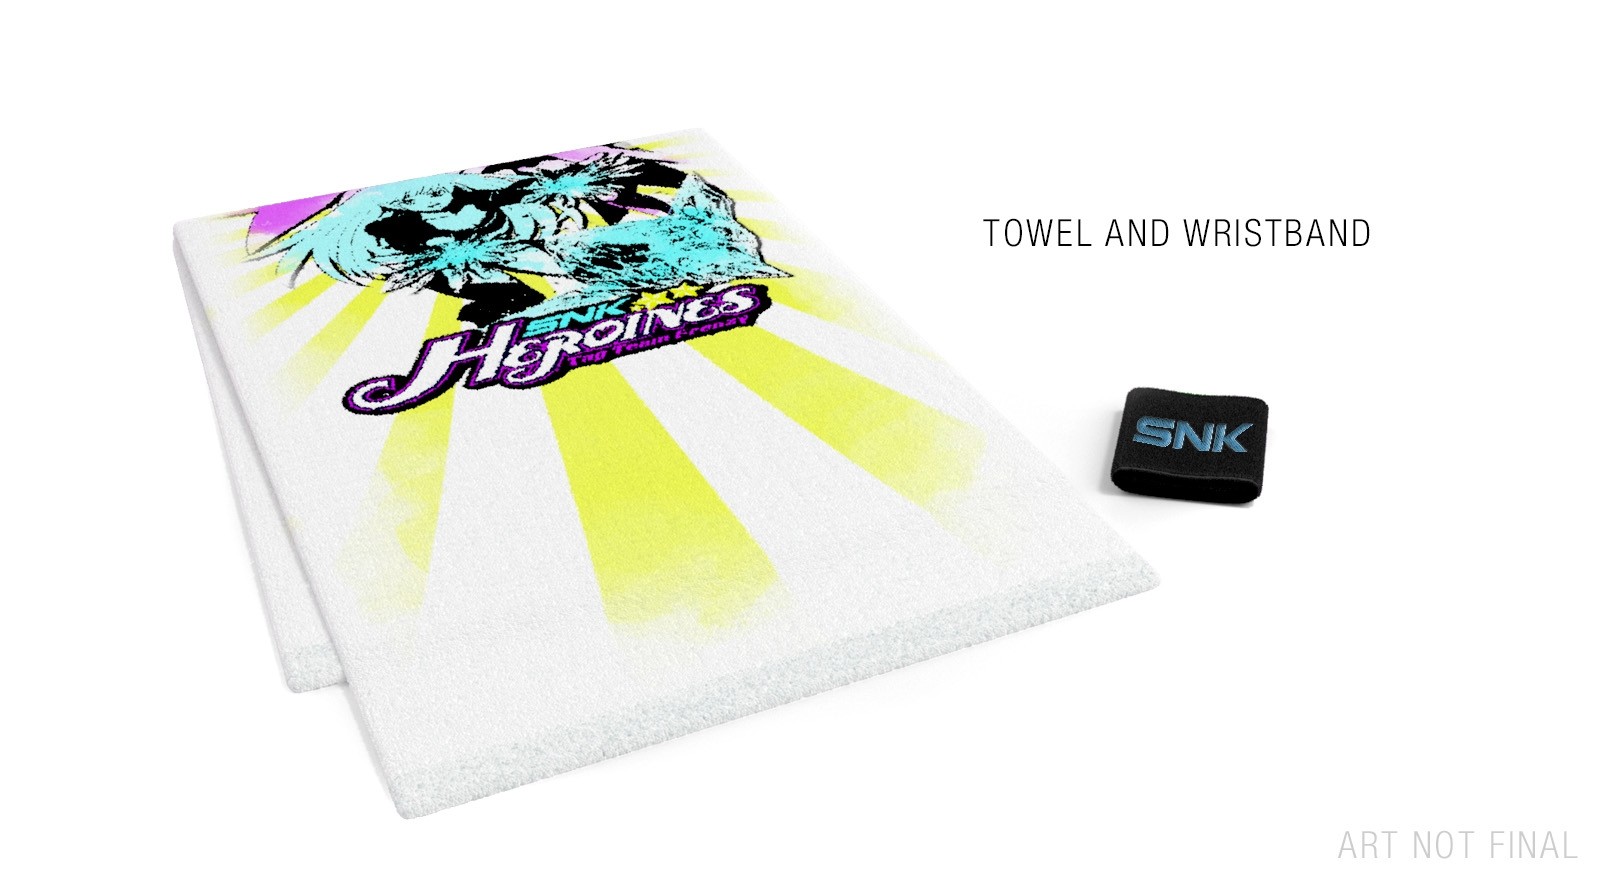 snk-heroines-tag-team-frenzy-towel-and-wristband-photo